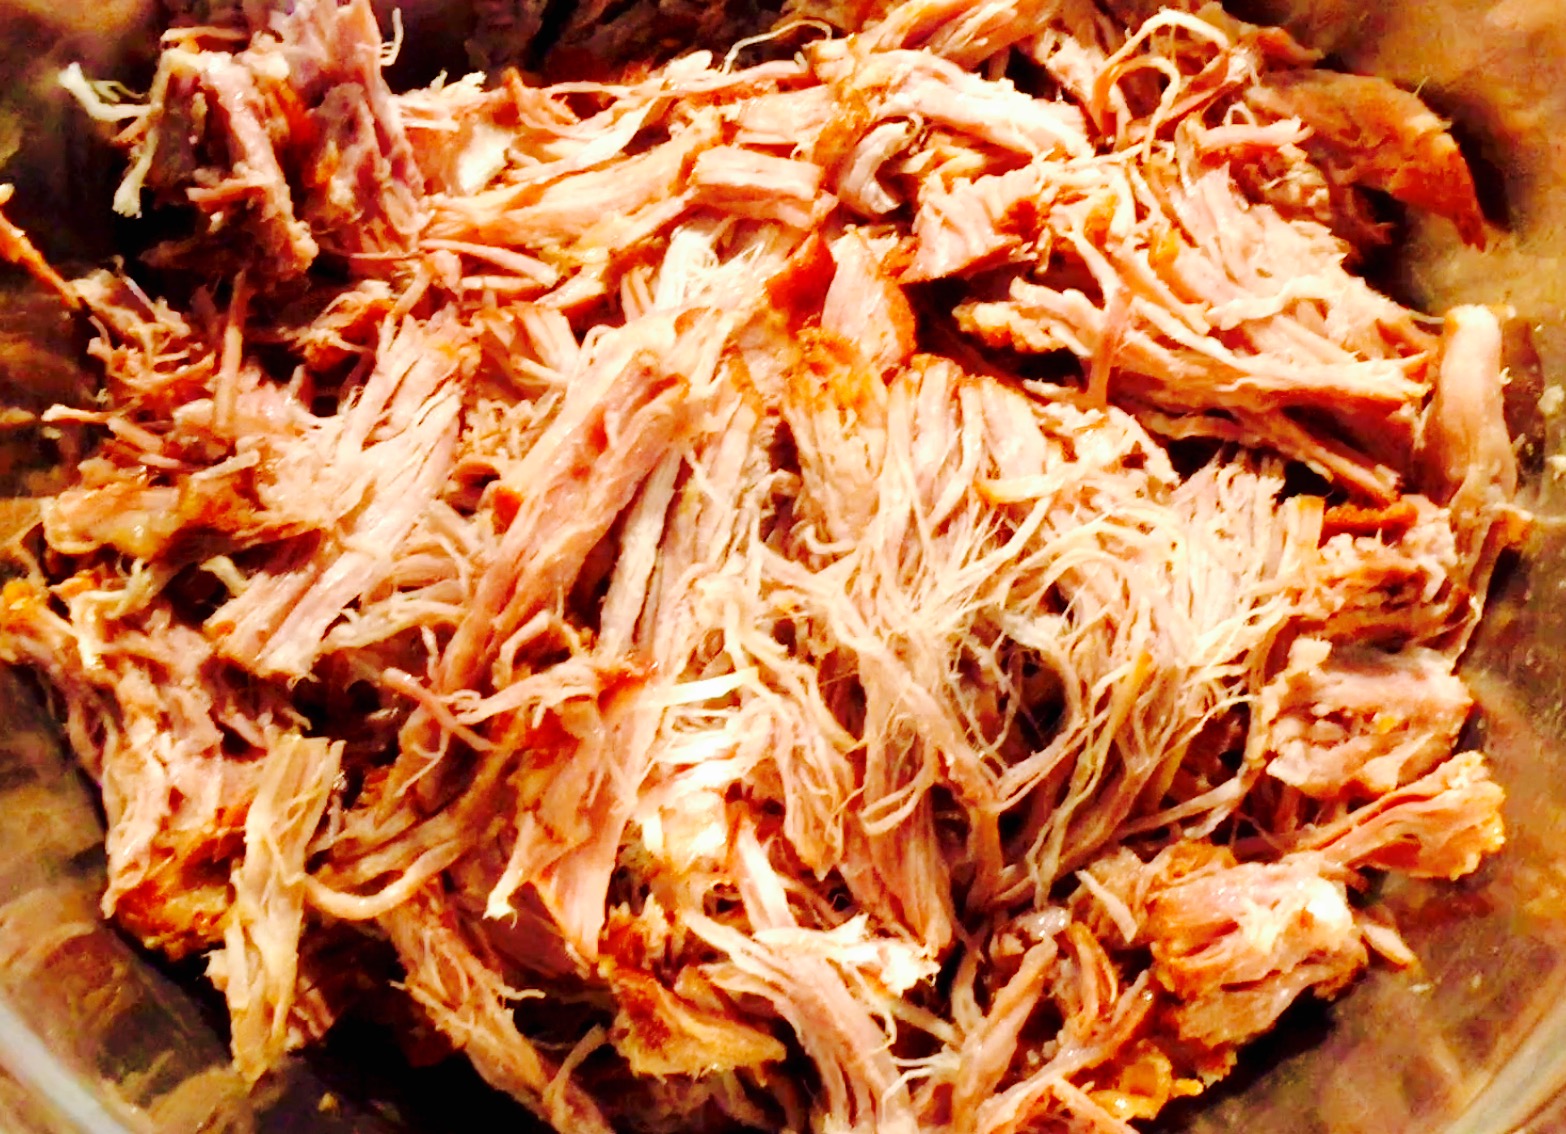 Succulent slow-roasted pulled pork ready to receive some delicious home made BBQ sauce